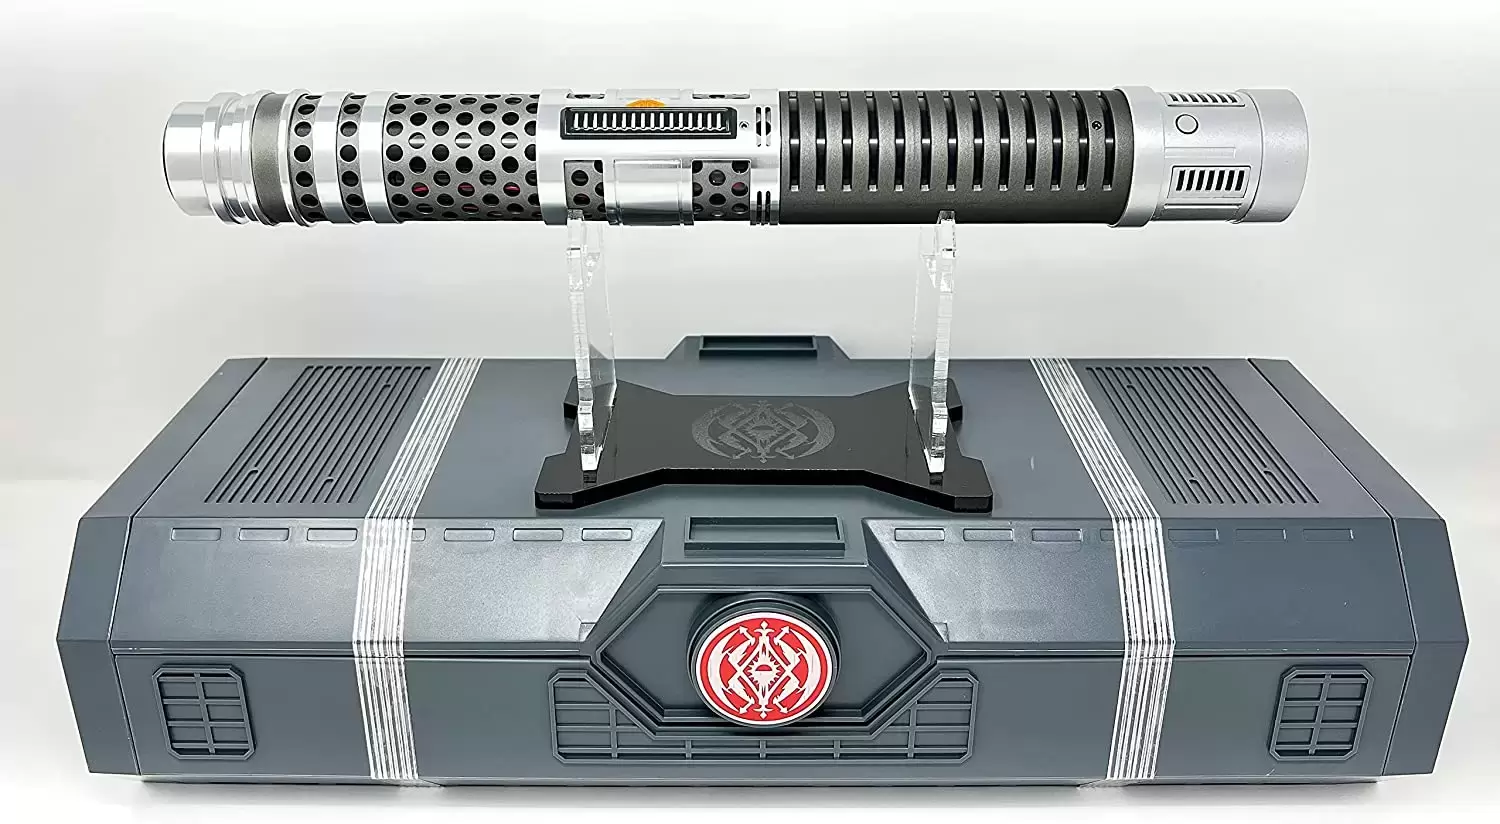 Lightsabers And Roleplay Items - Legacy Lightsaber - Darth Maul Shadow Collective Lightsaber